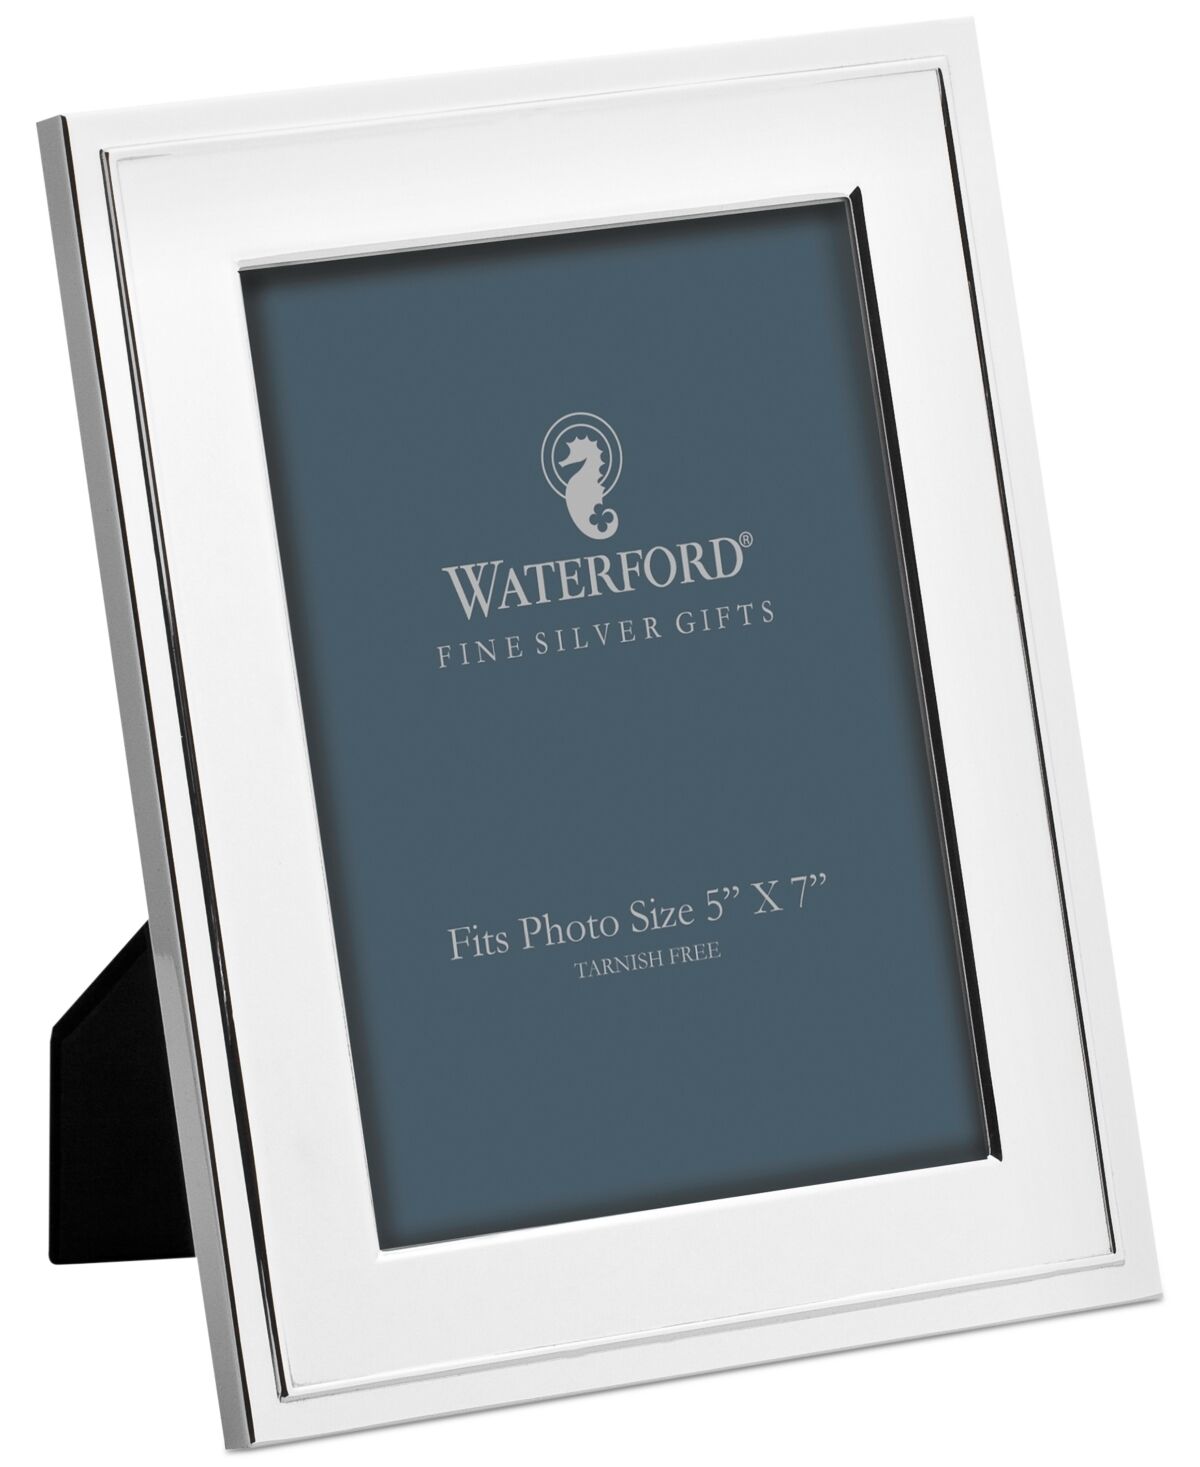 Waterford Classic Frame 5x7